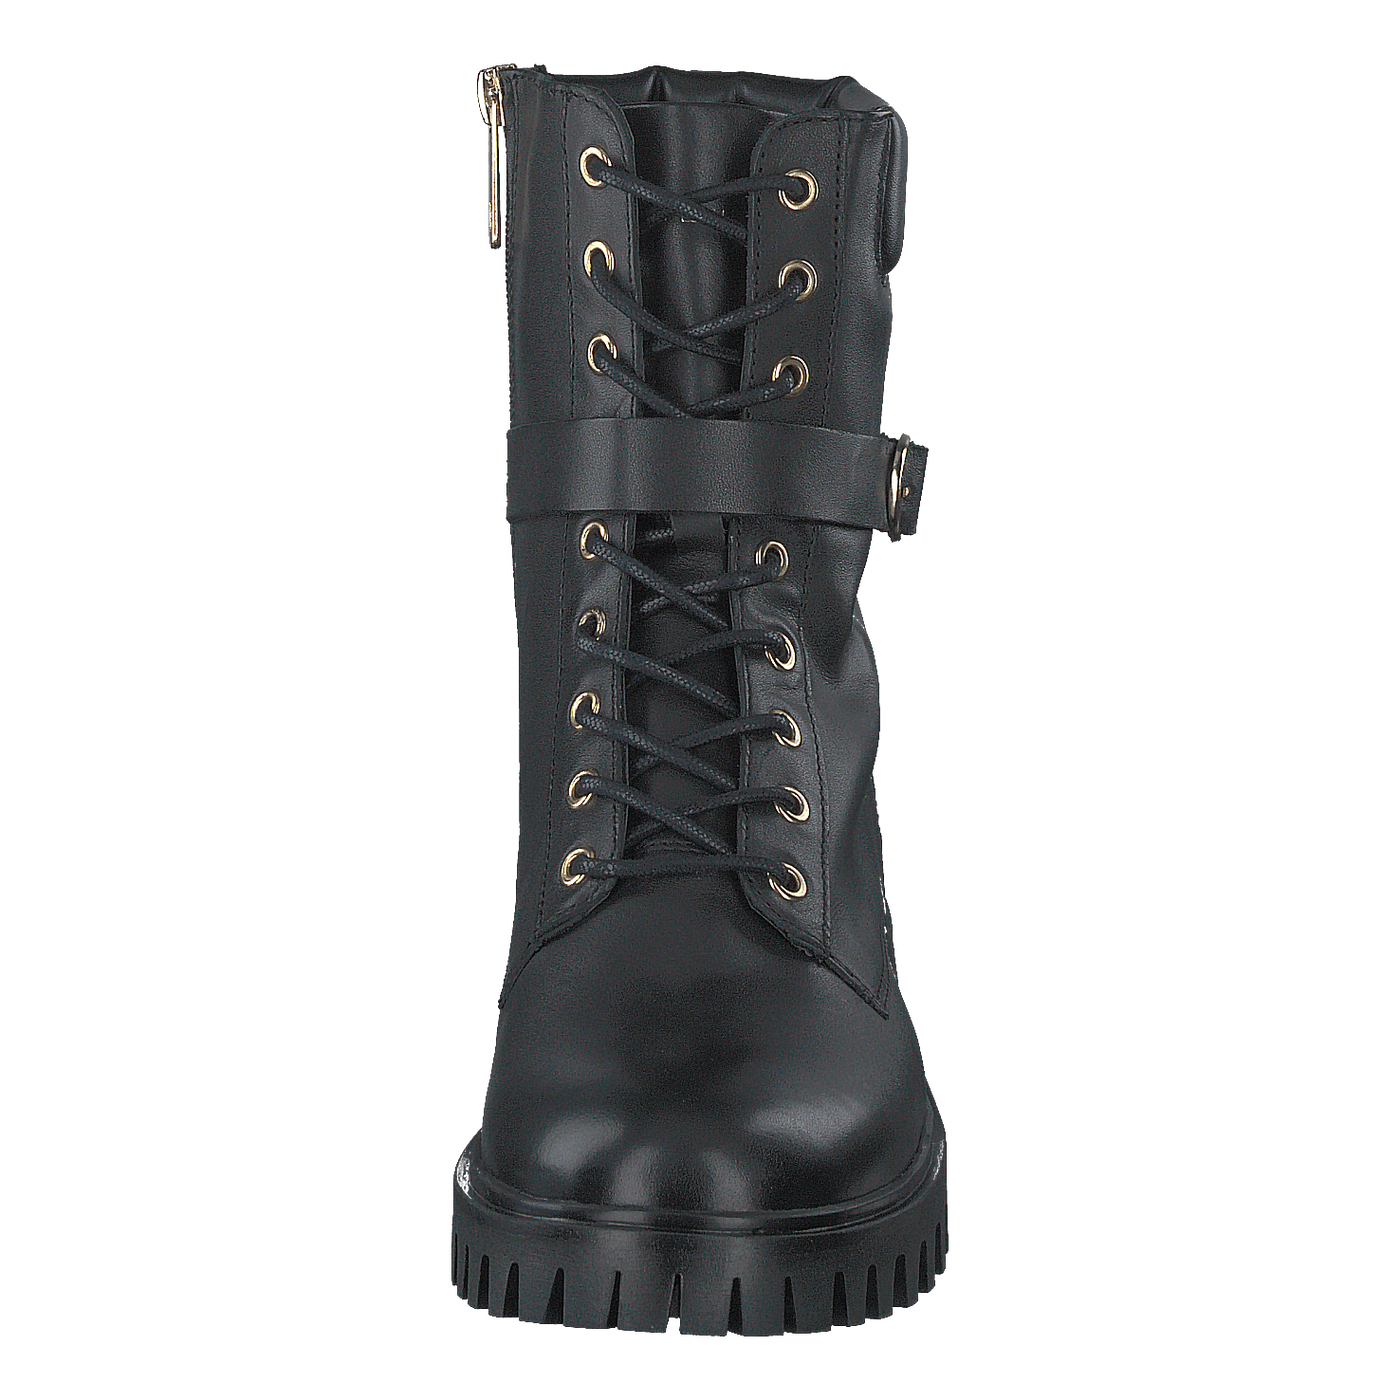 Buckle Lace Up Boot Black